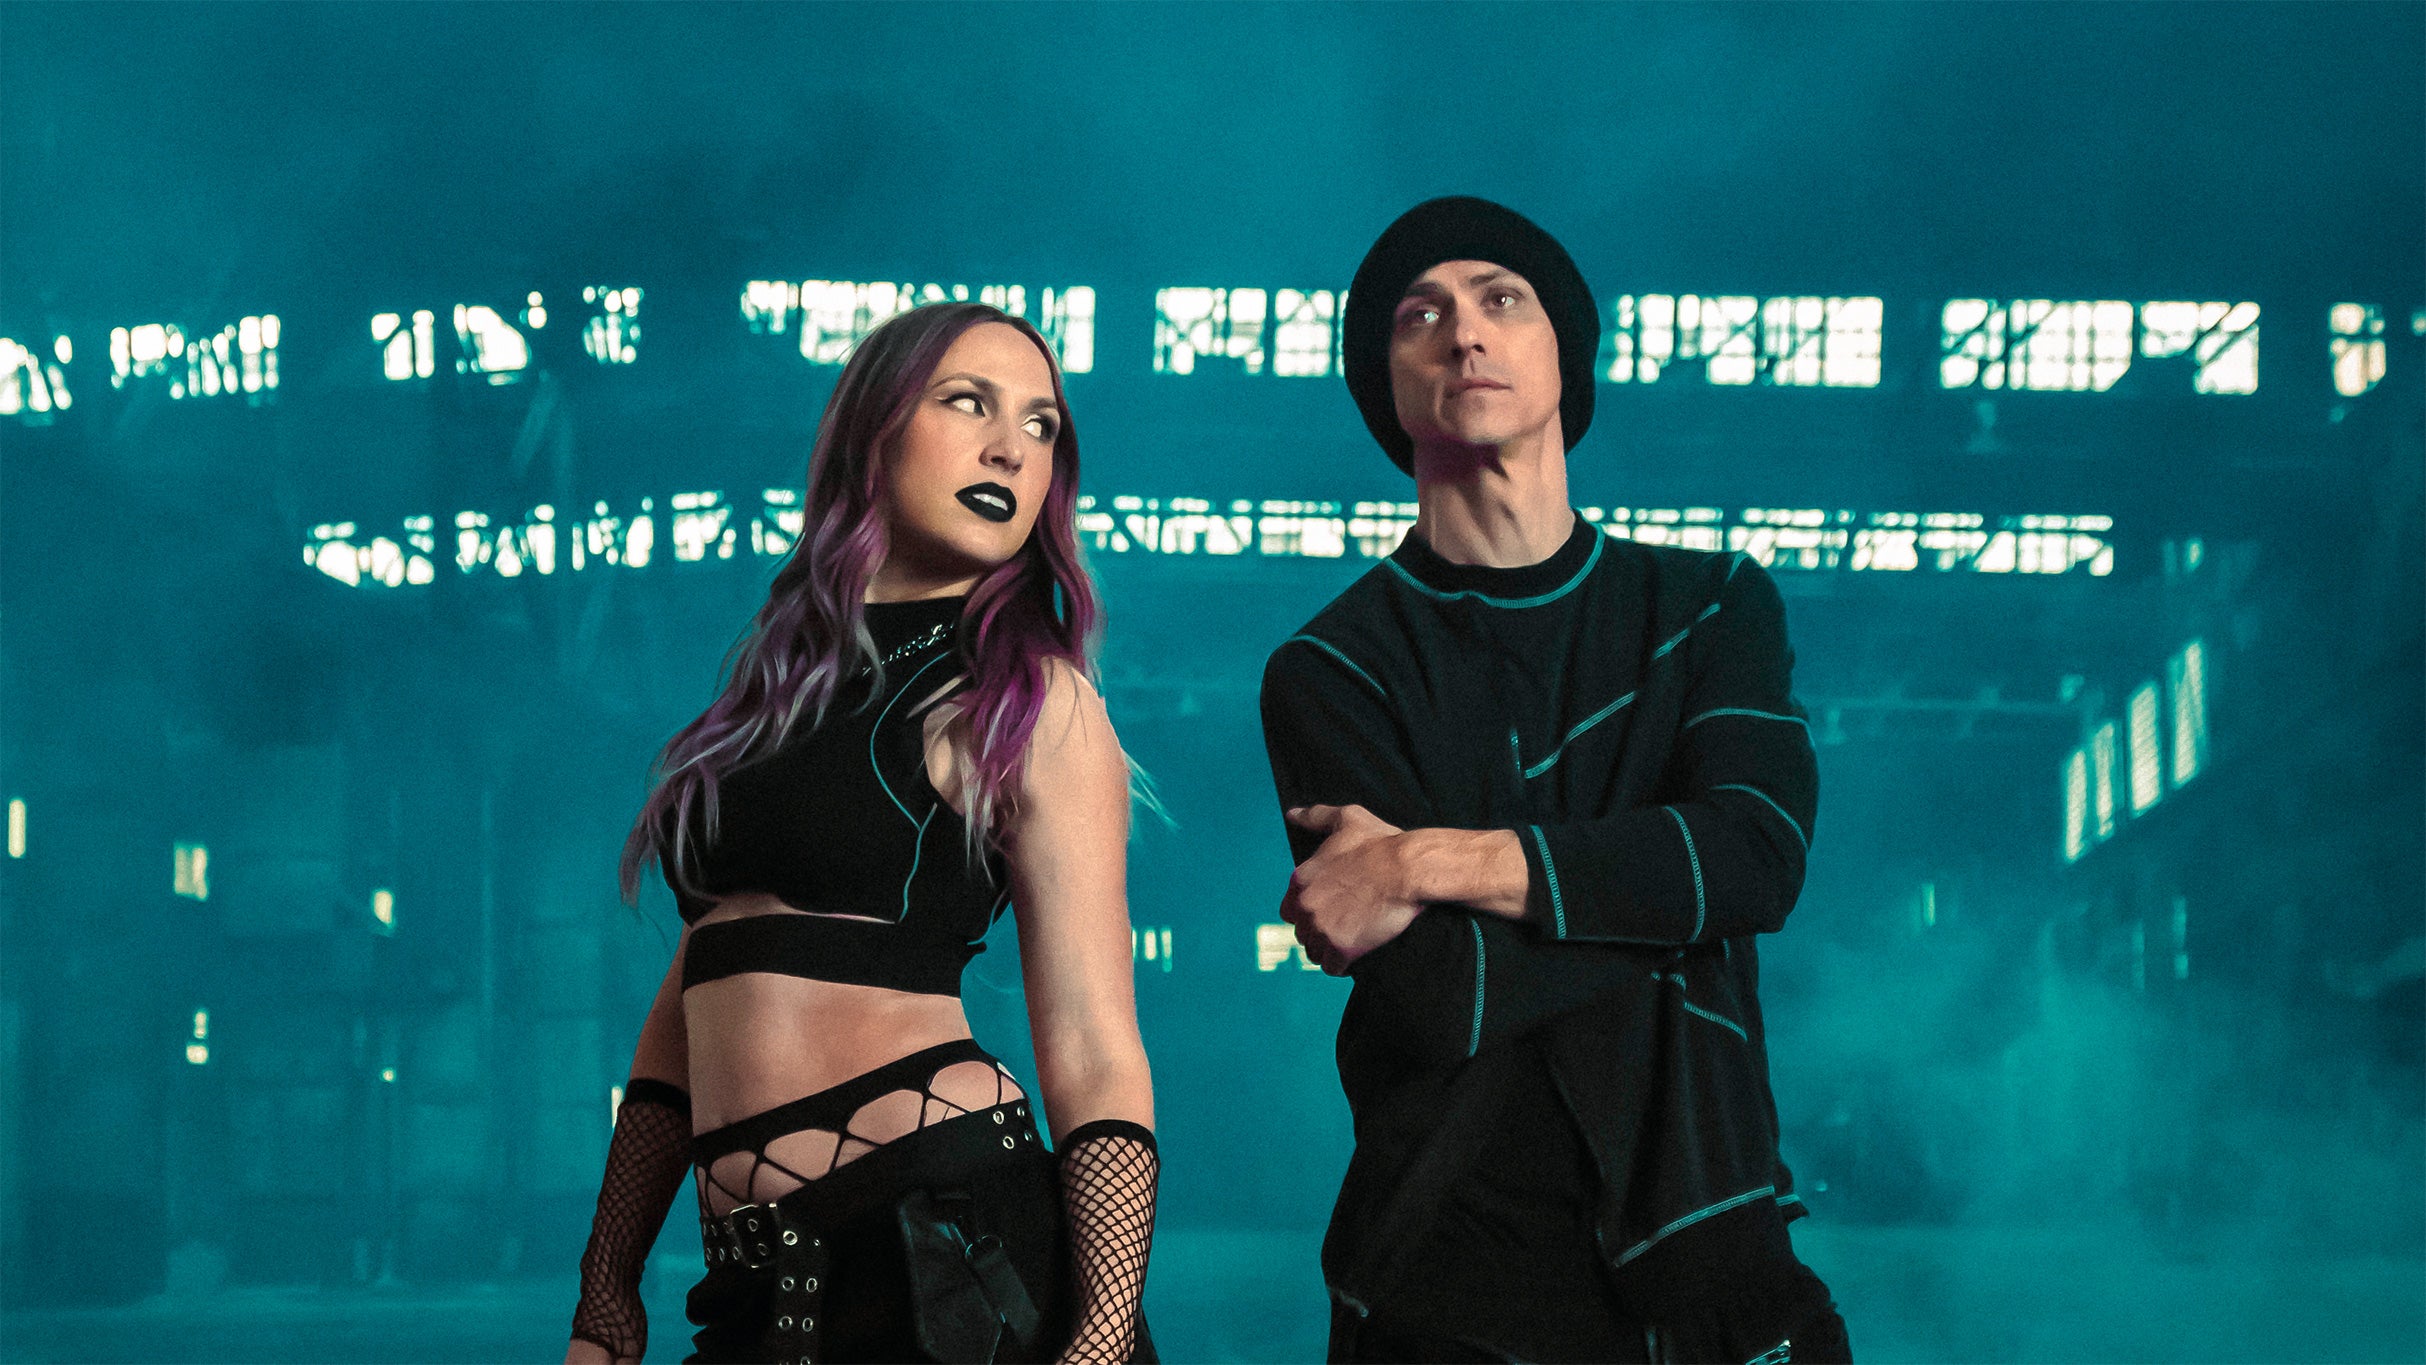 Icon for Hire with special guests at Brick by Brick